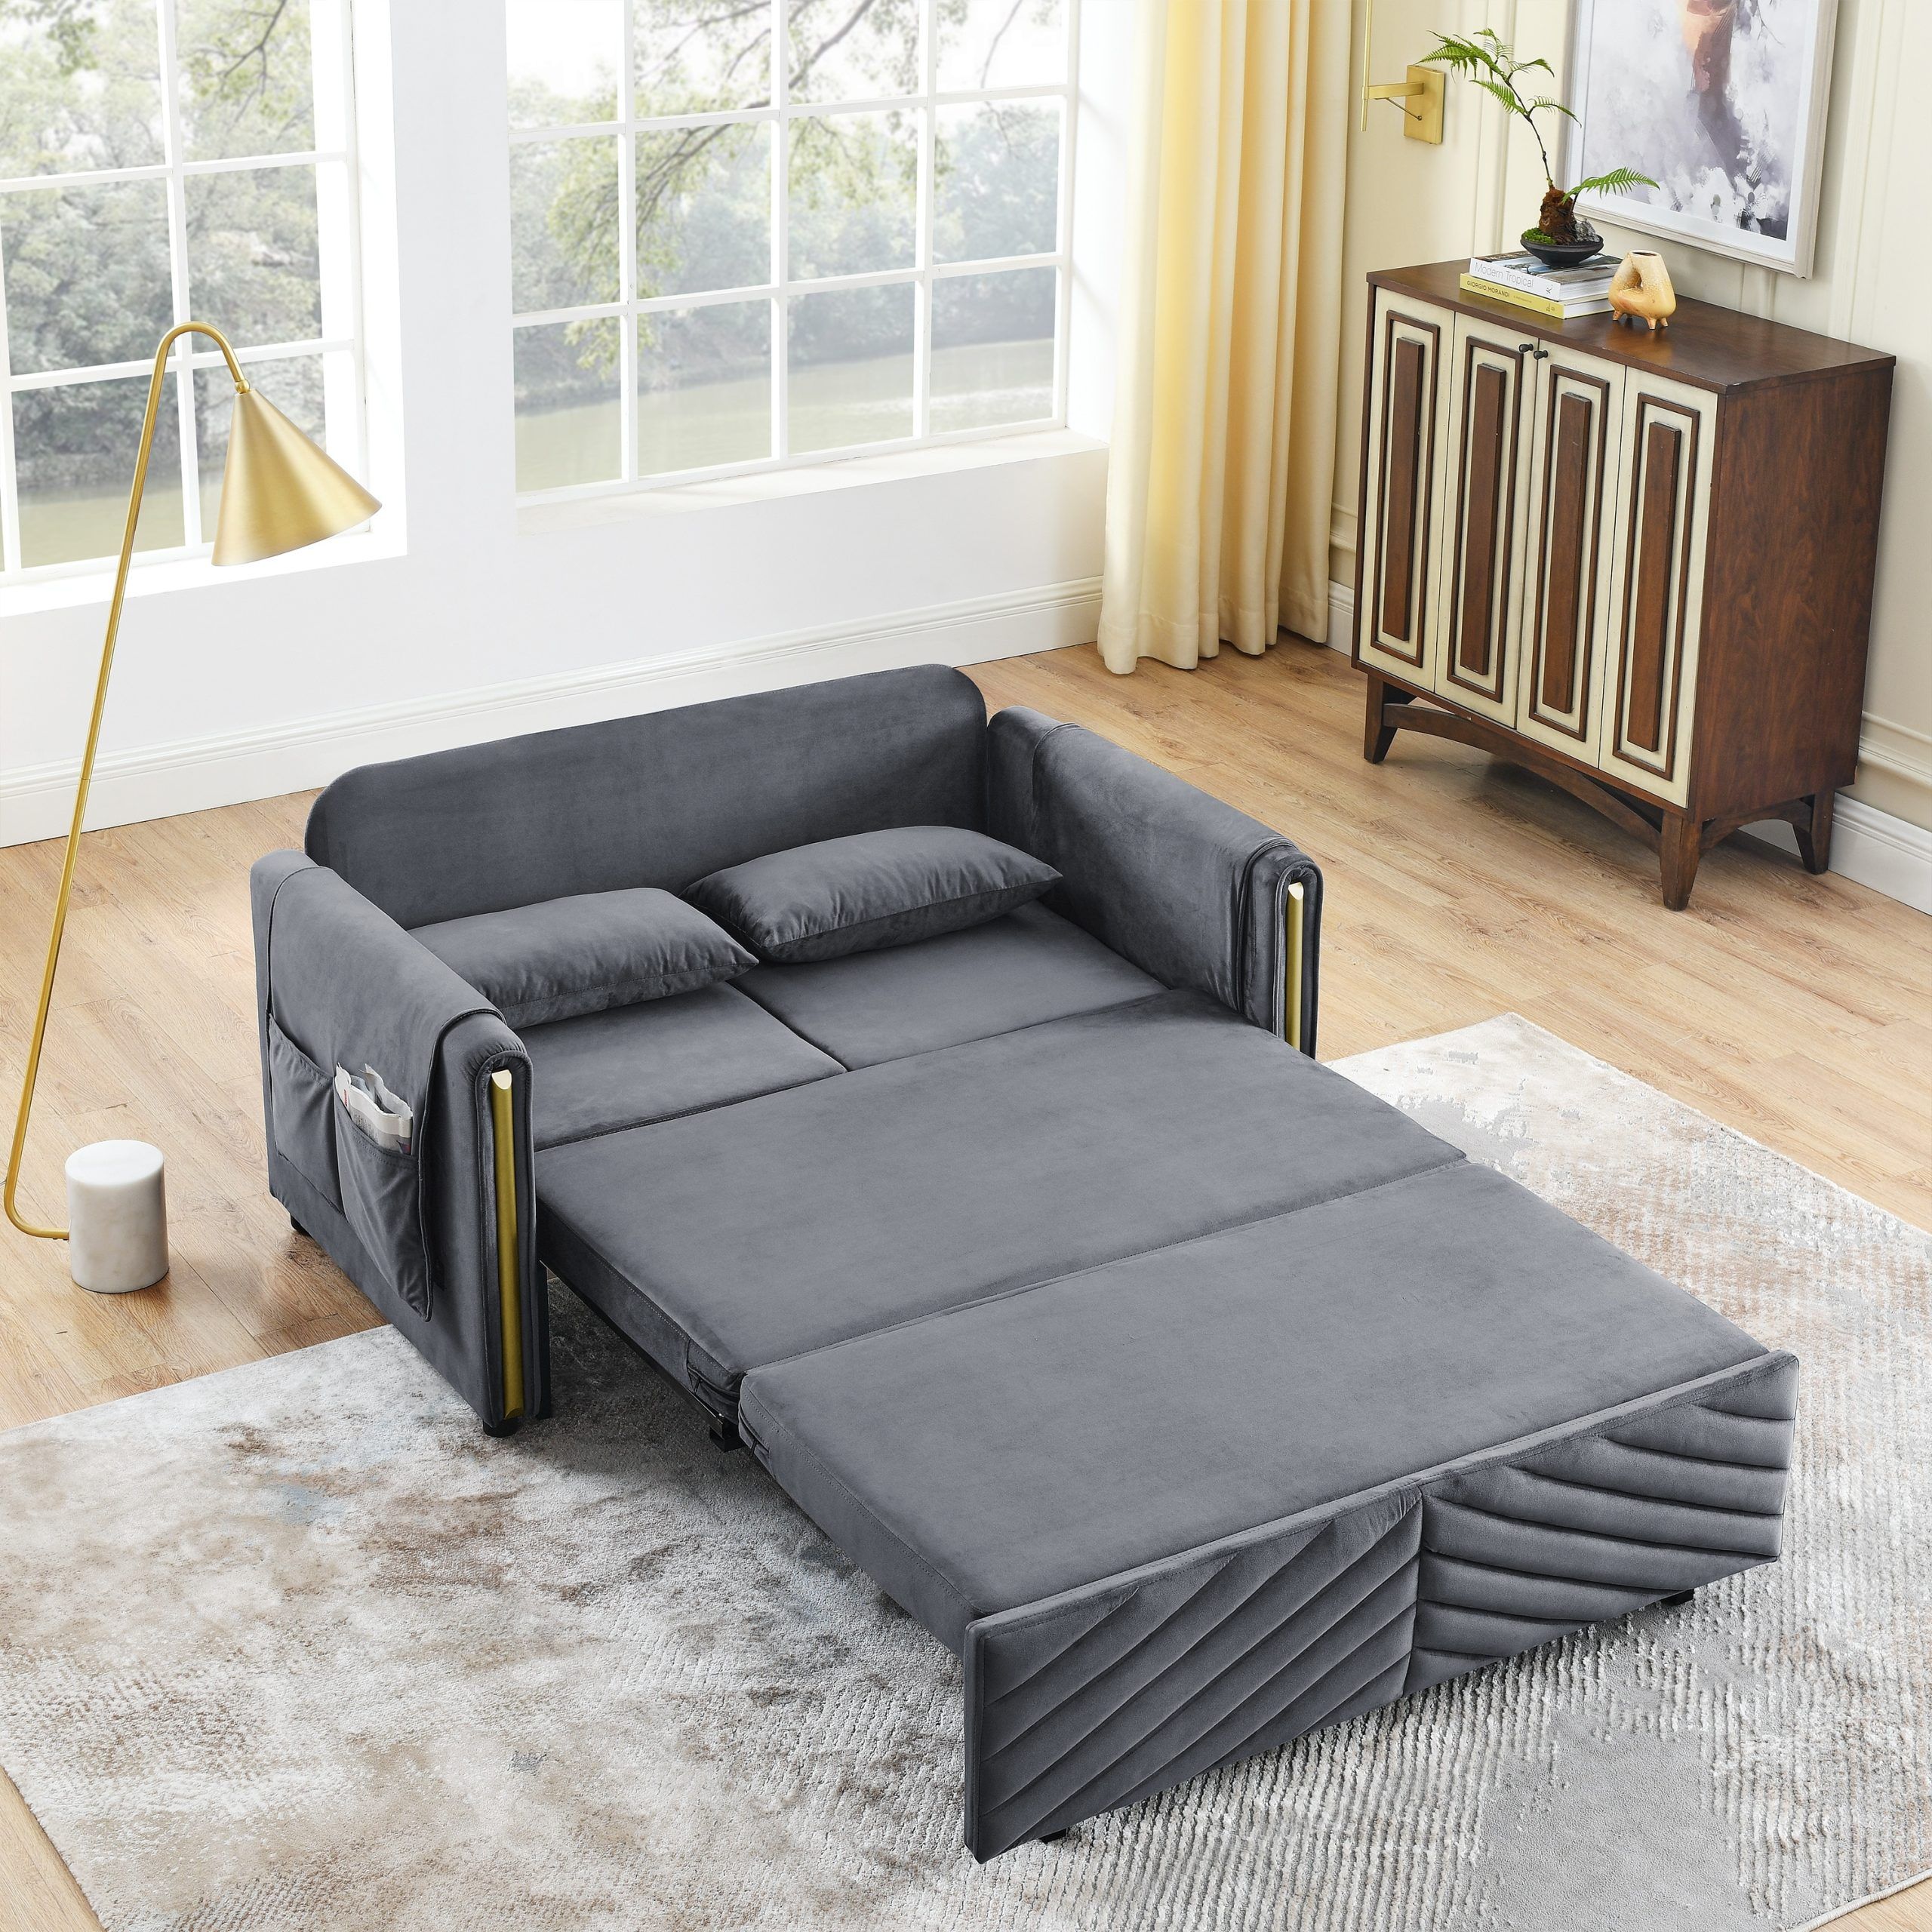 3 In 1 Convertible Sleeper Sofa Bed, 55" Multi Functional Pull Out Couch,  Velvet Loveseat Futon Bed W/2 Pillows & Storage Bags – Bed Bath & Beyond –  38908479 Throughout 3 In 1 Gray Pull Out Sleeper Sofas (View 3 of 15)